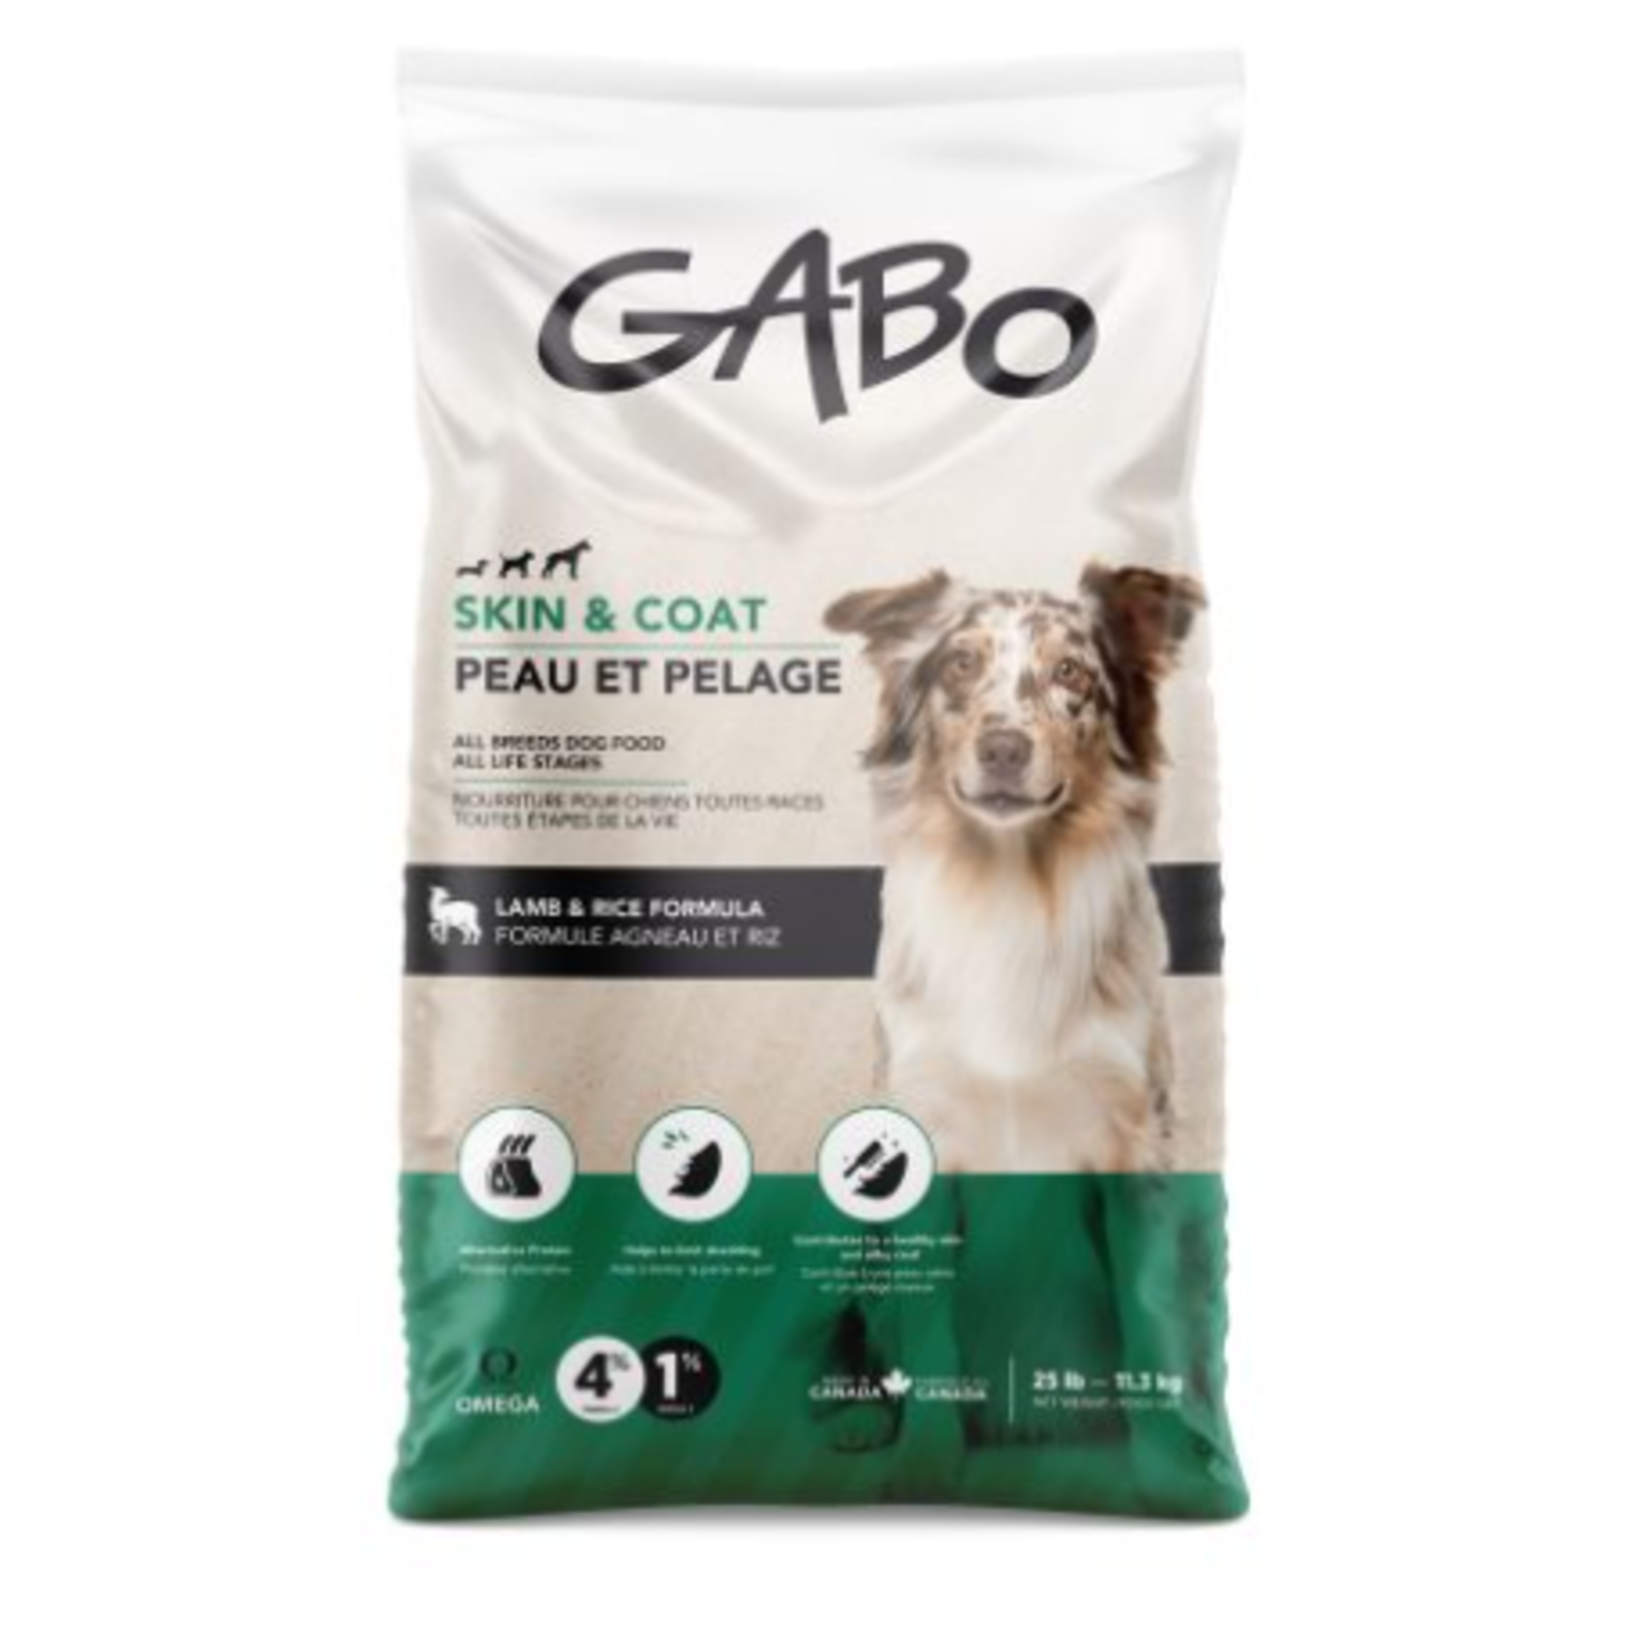 Gabo Lamb & Rice - Skin & Coat - All life stage - 8lbs